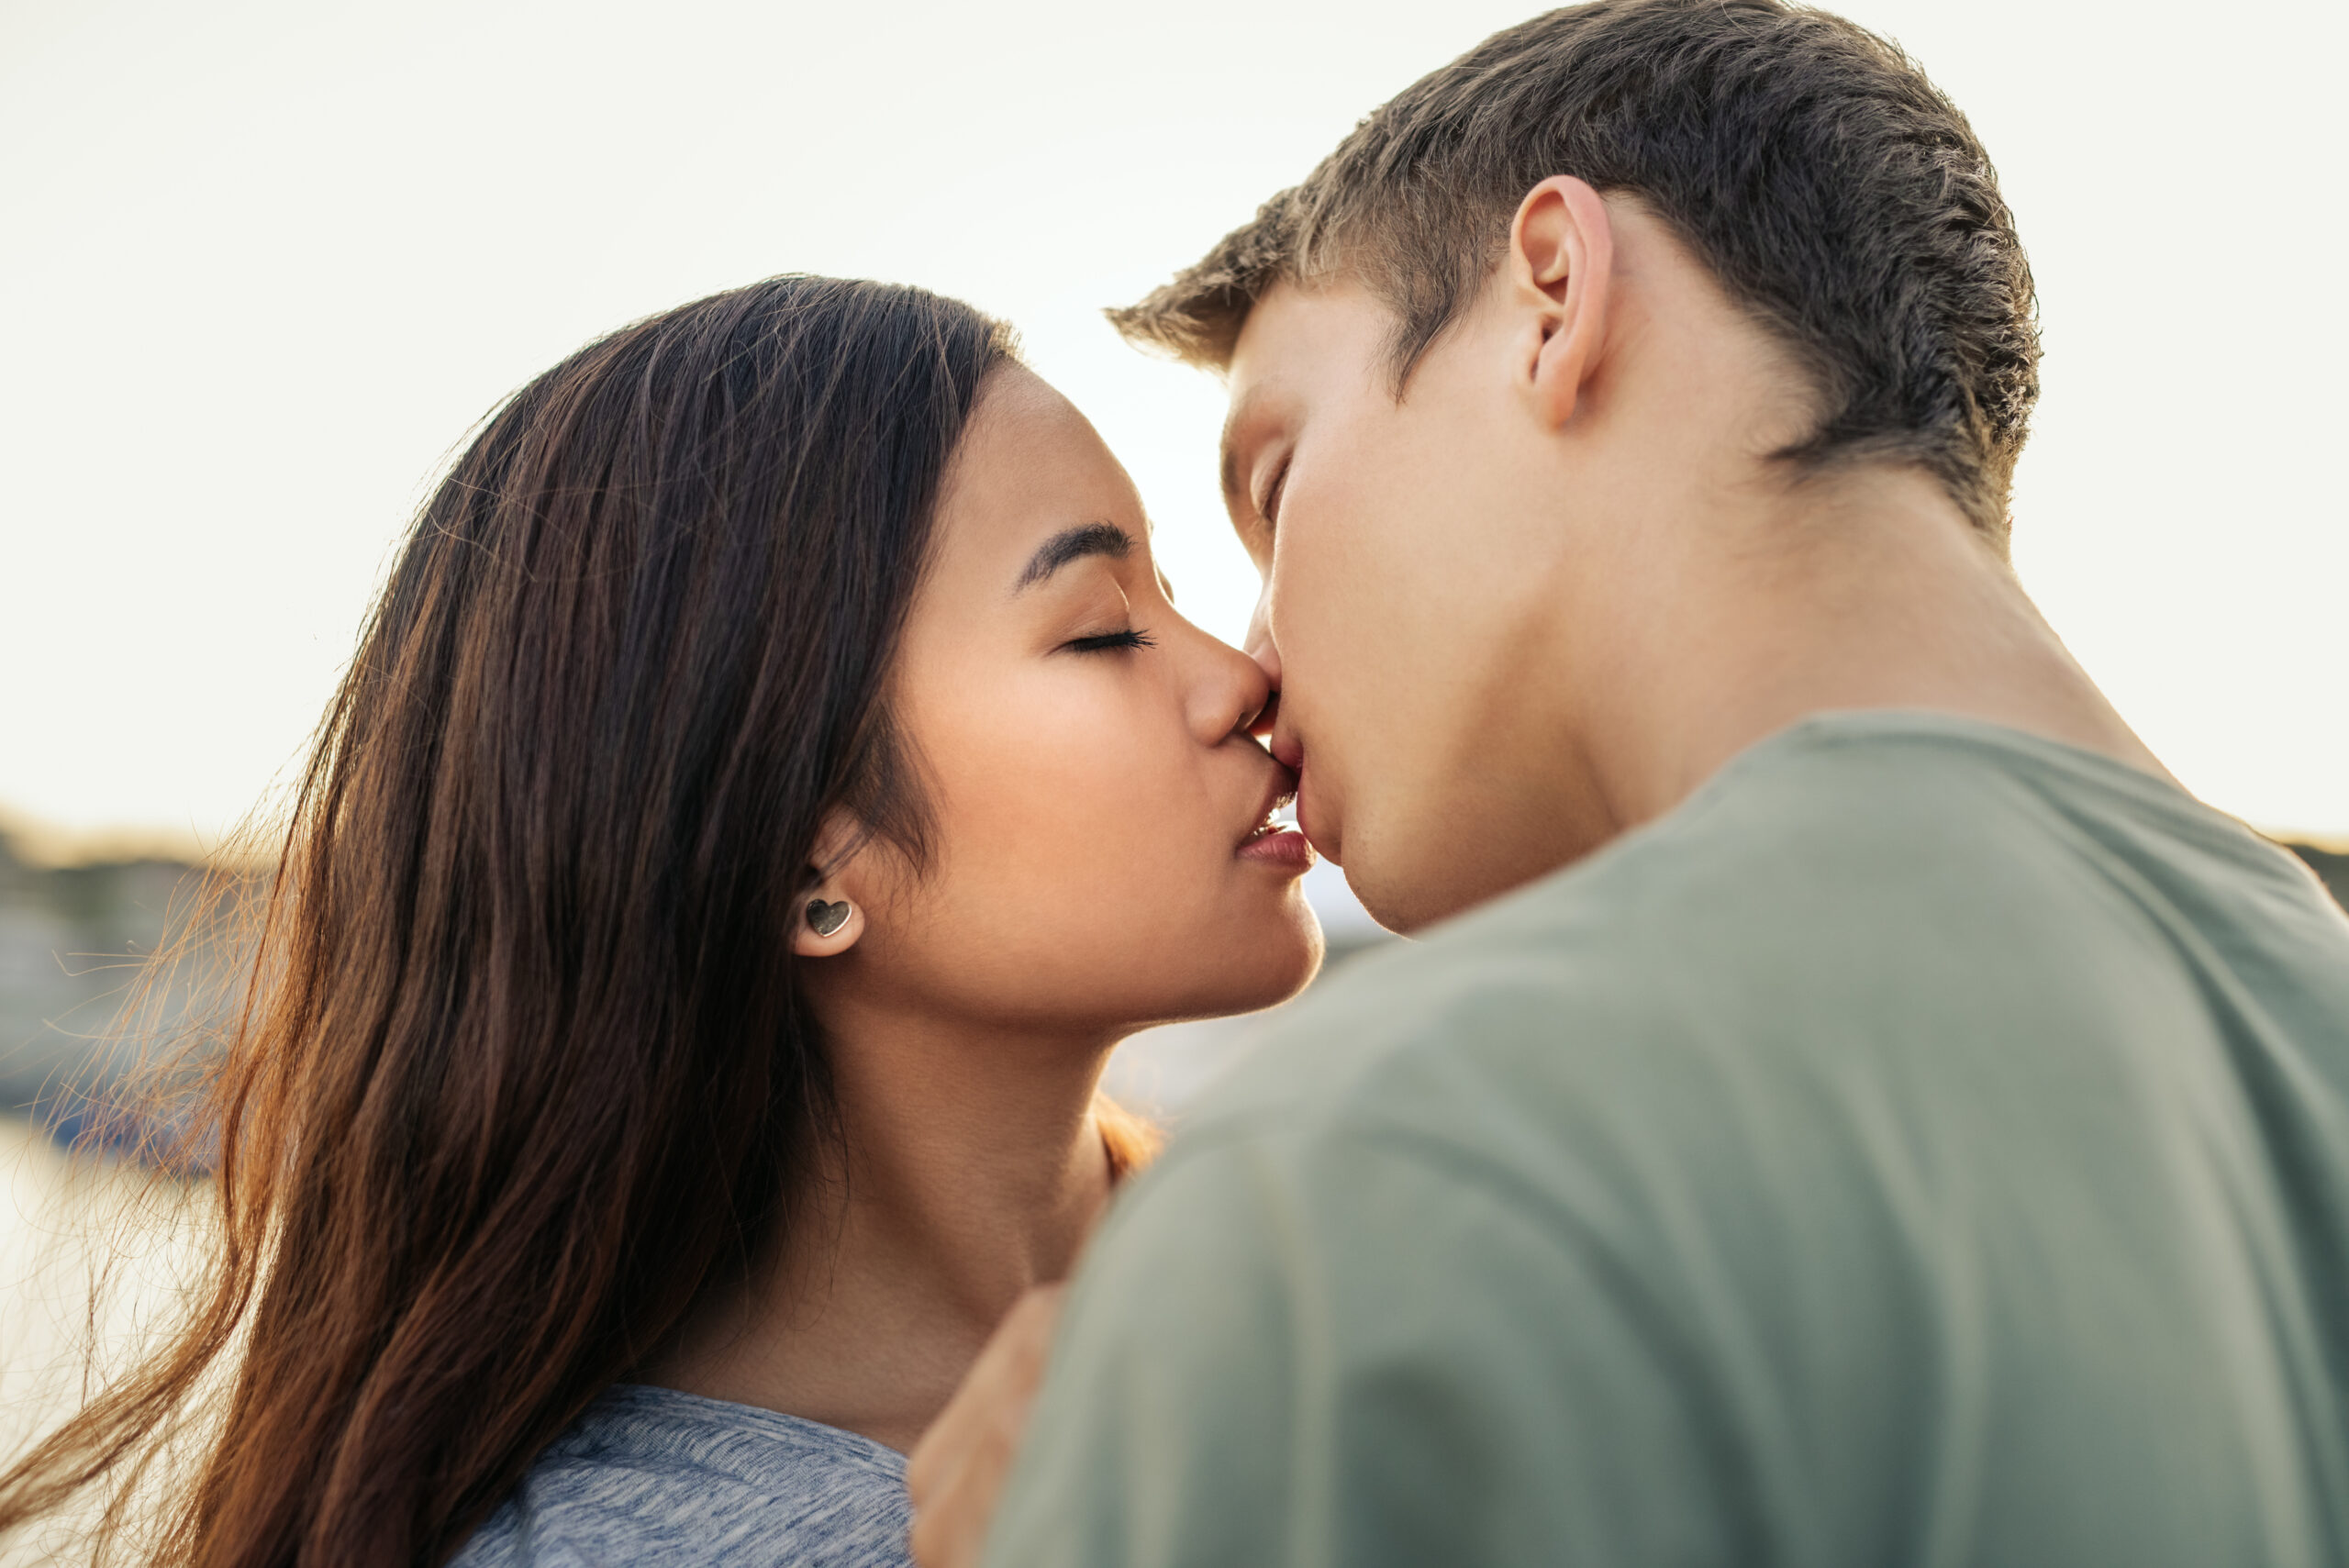 What Should I Do Now That My Teen Started Dating?